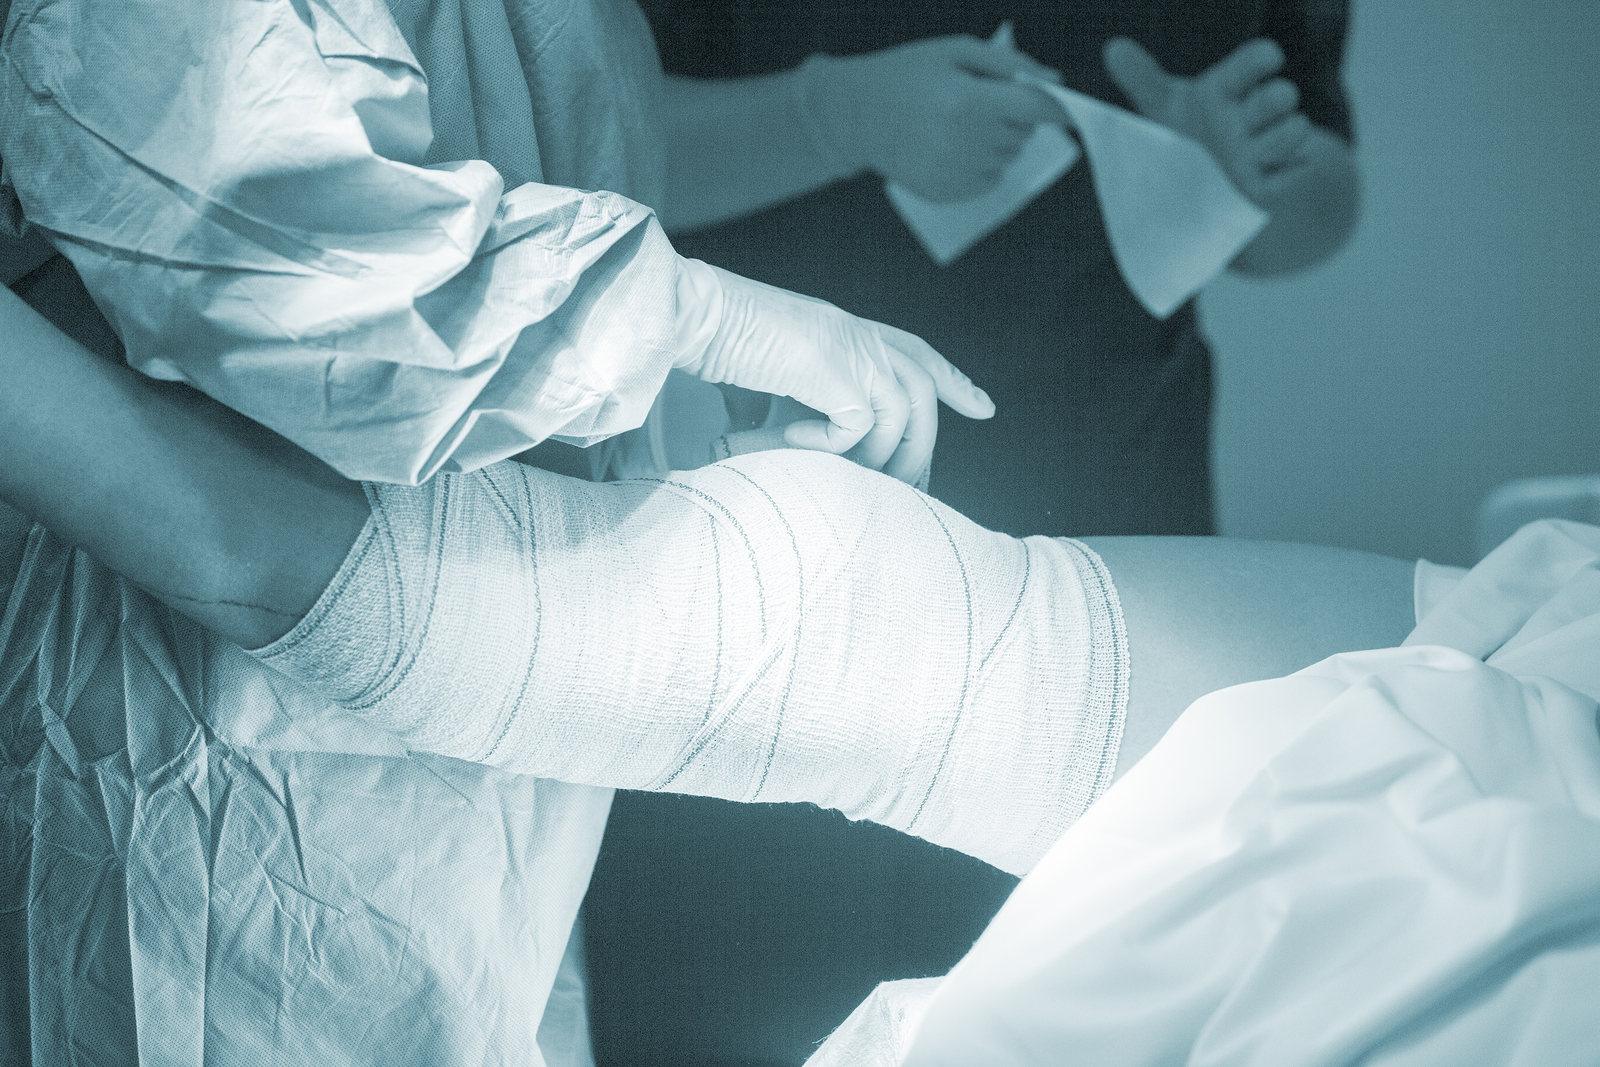 Study: Knee surgery no better than placebo